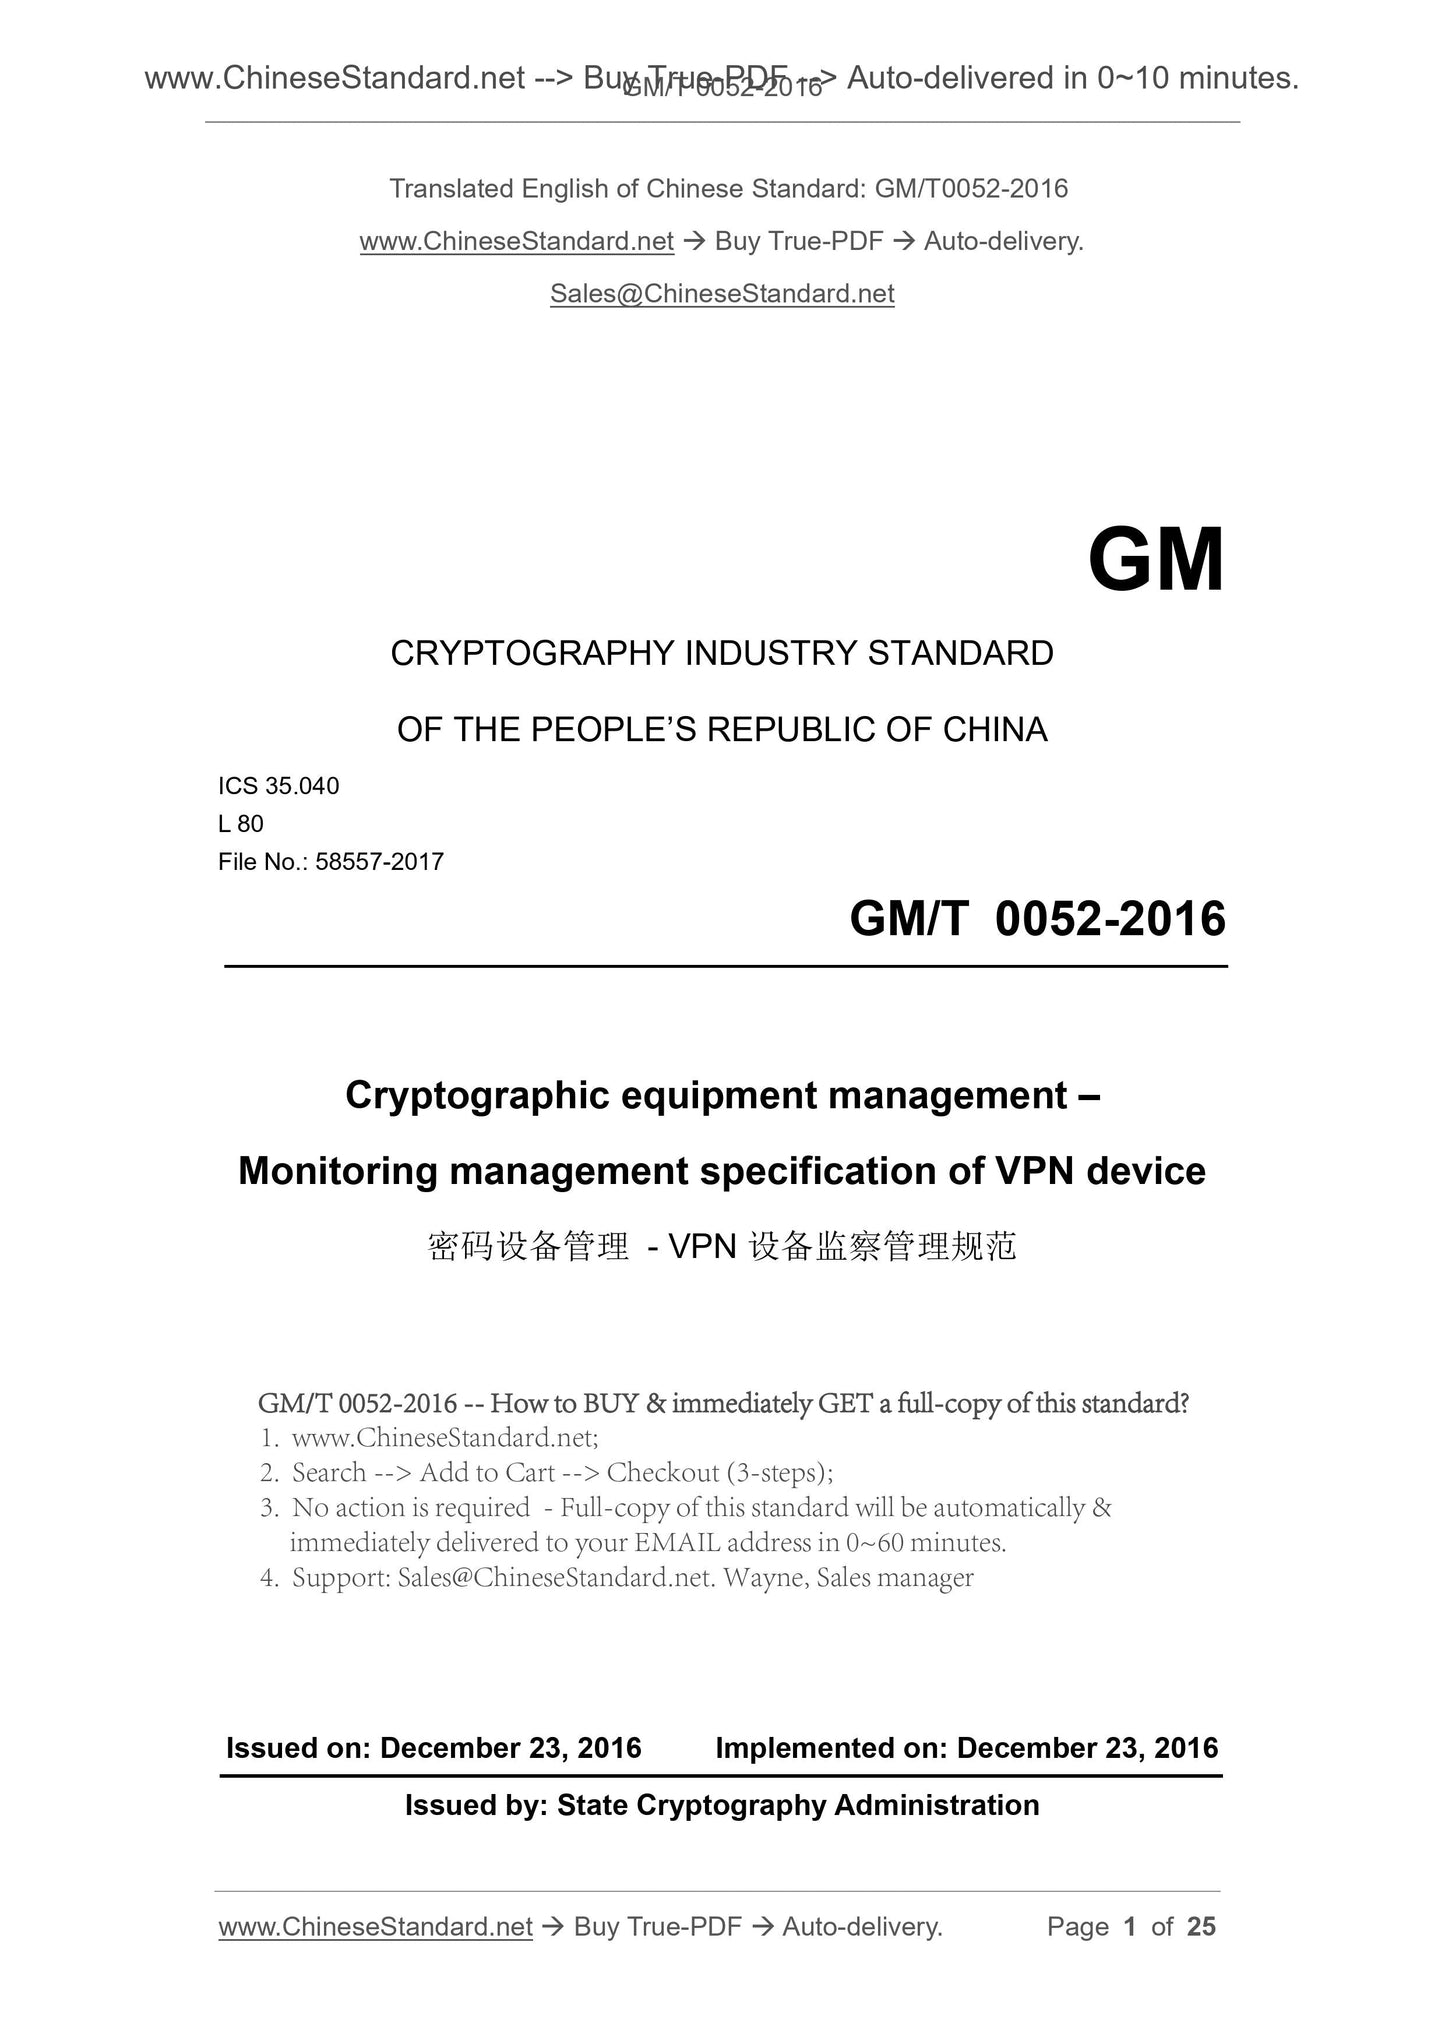 GM/T 0052-2016 Page 1